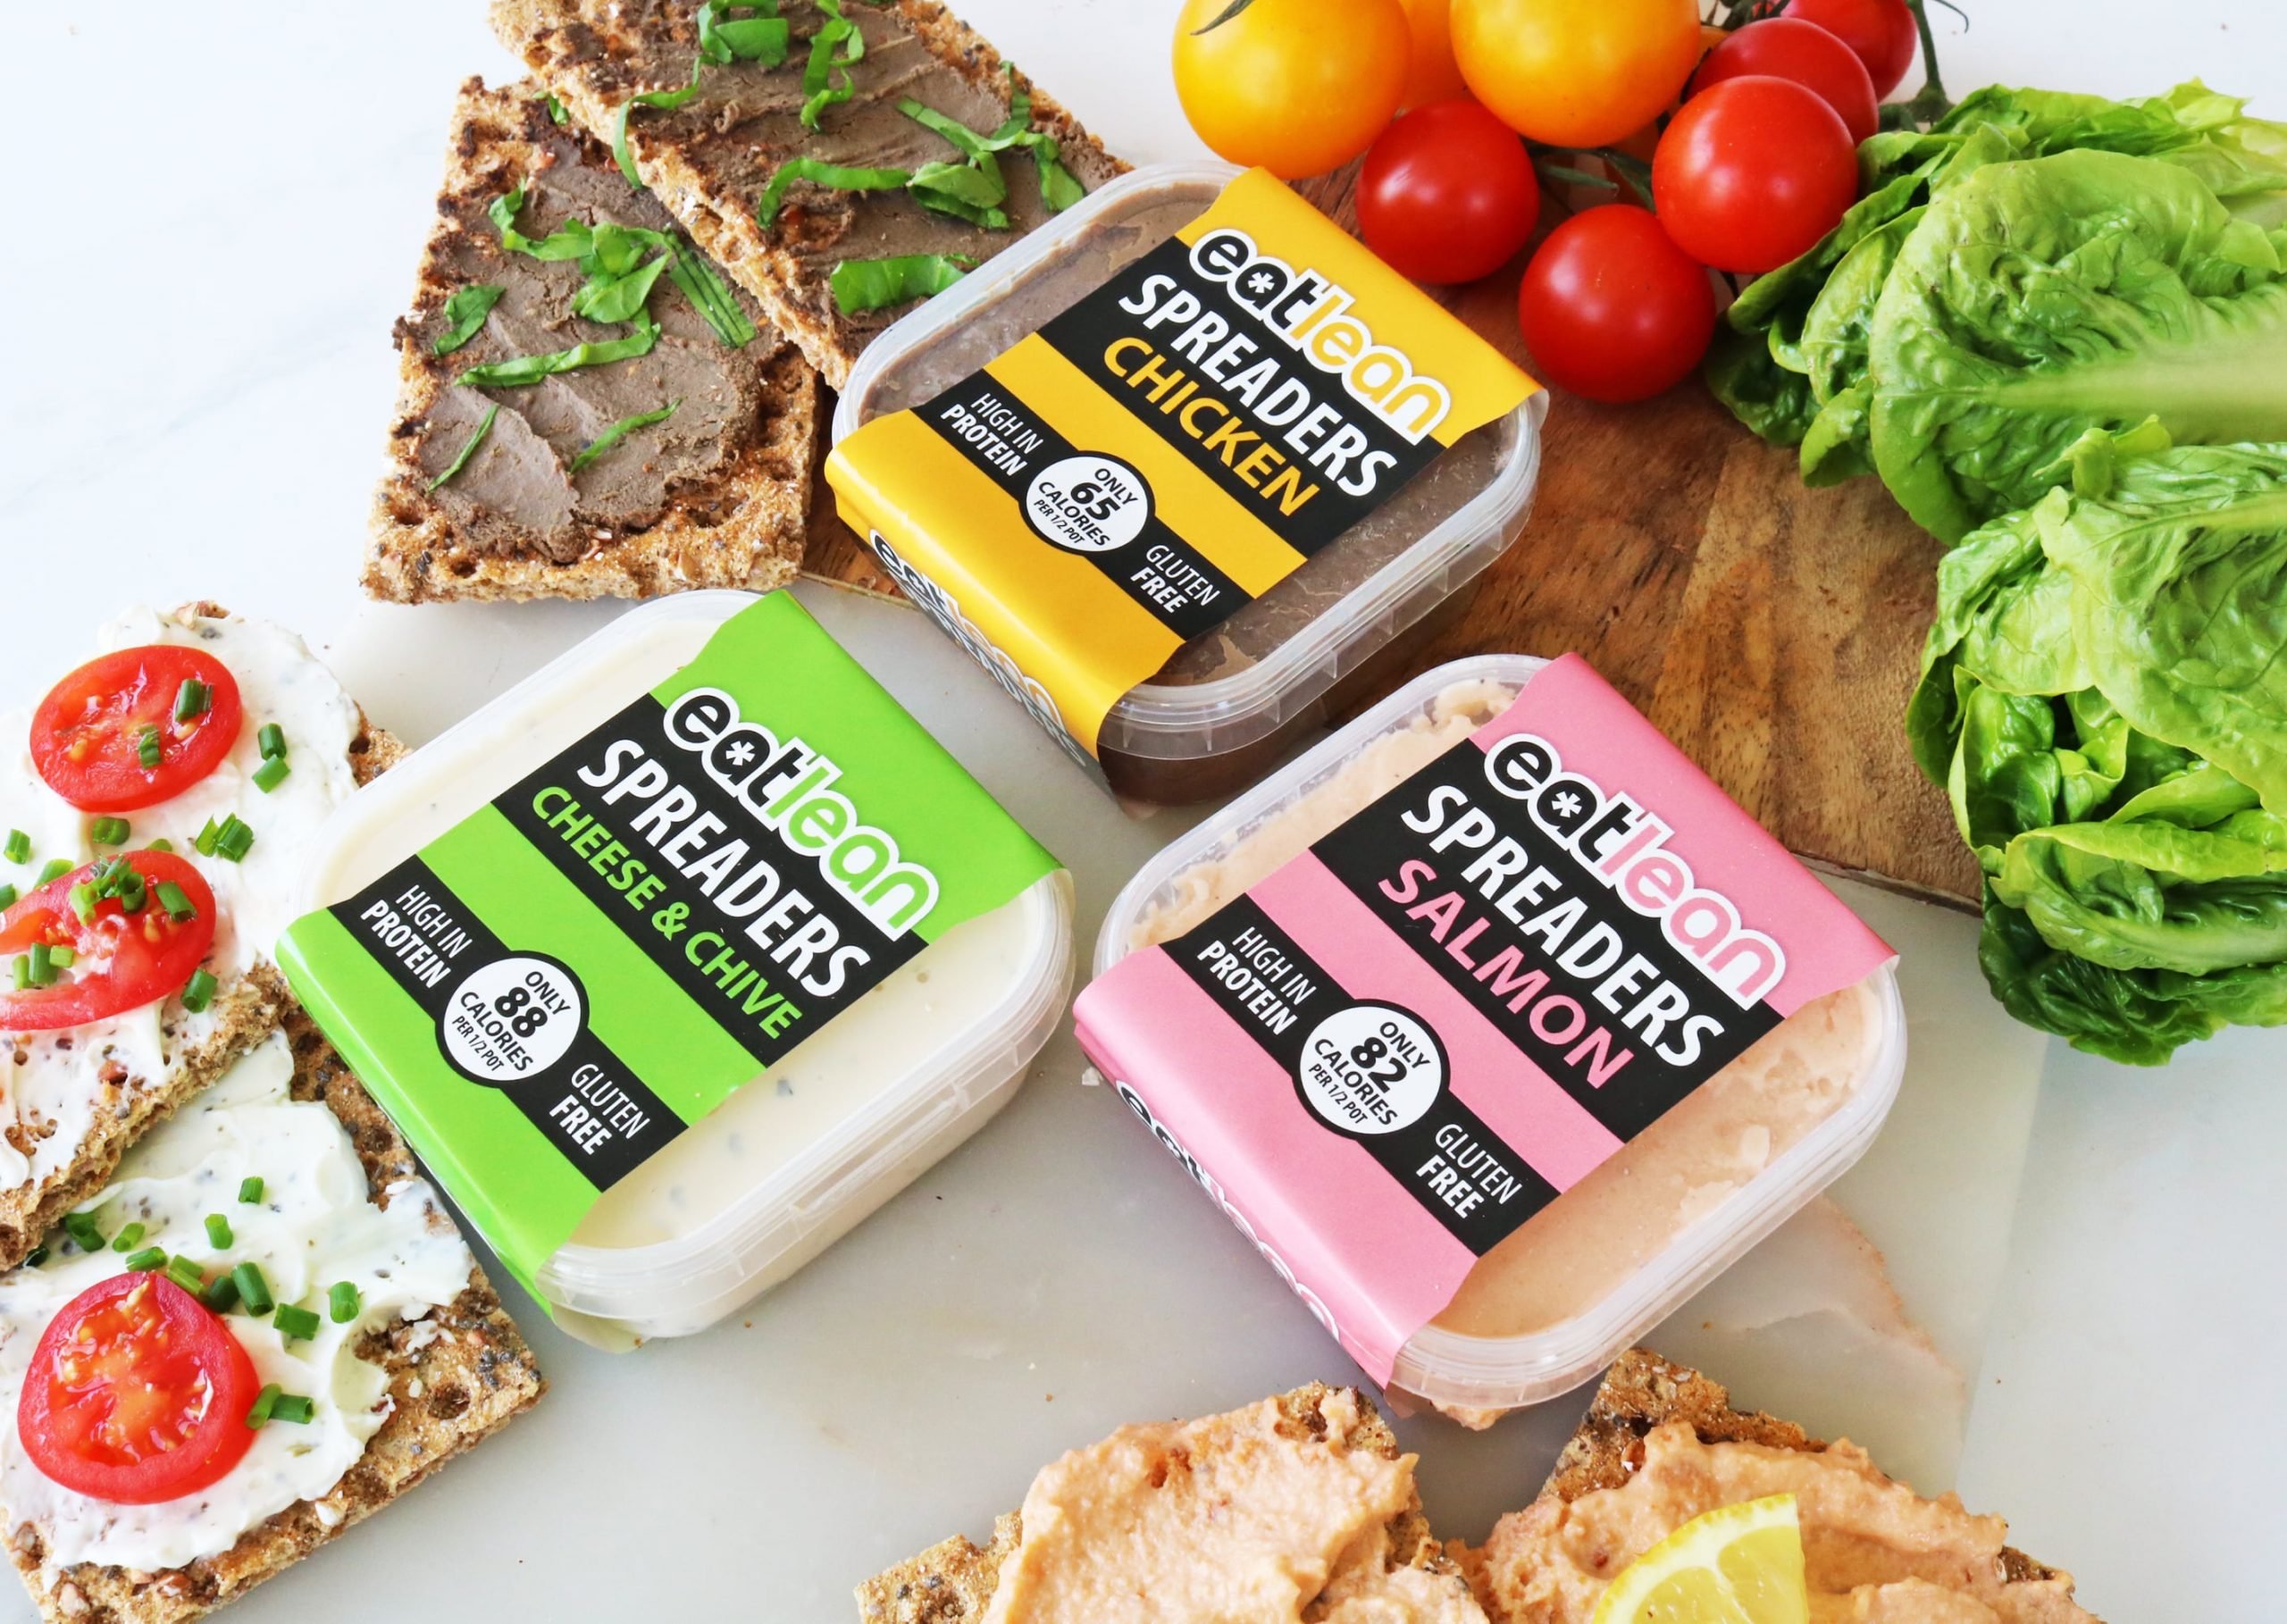 Low fat, low calorie, high protein spreads, s